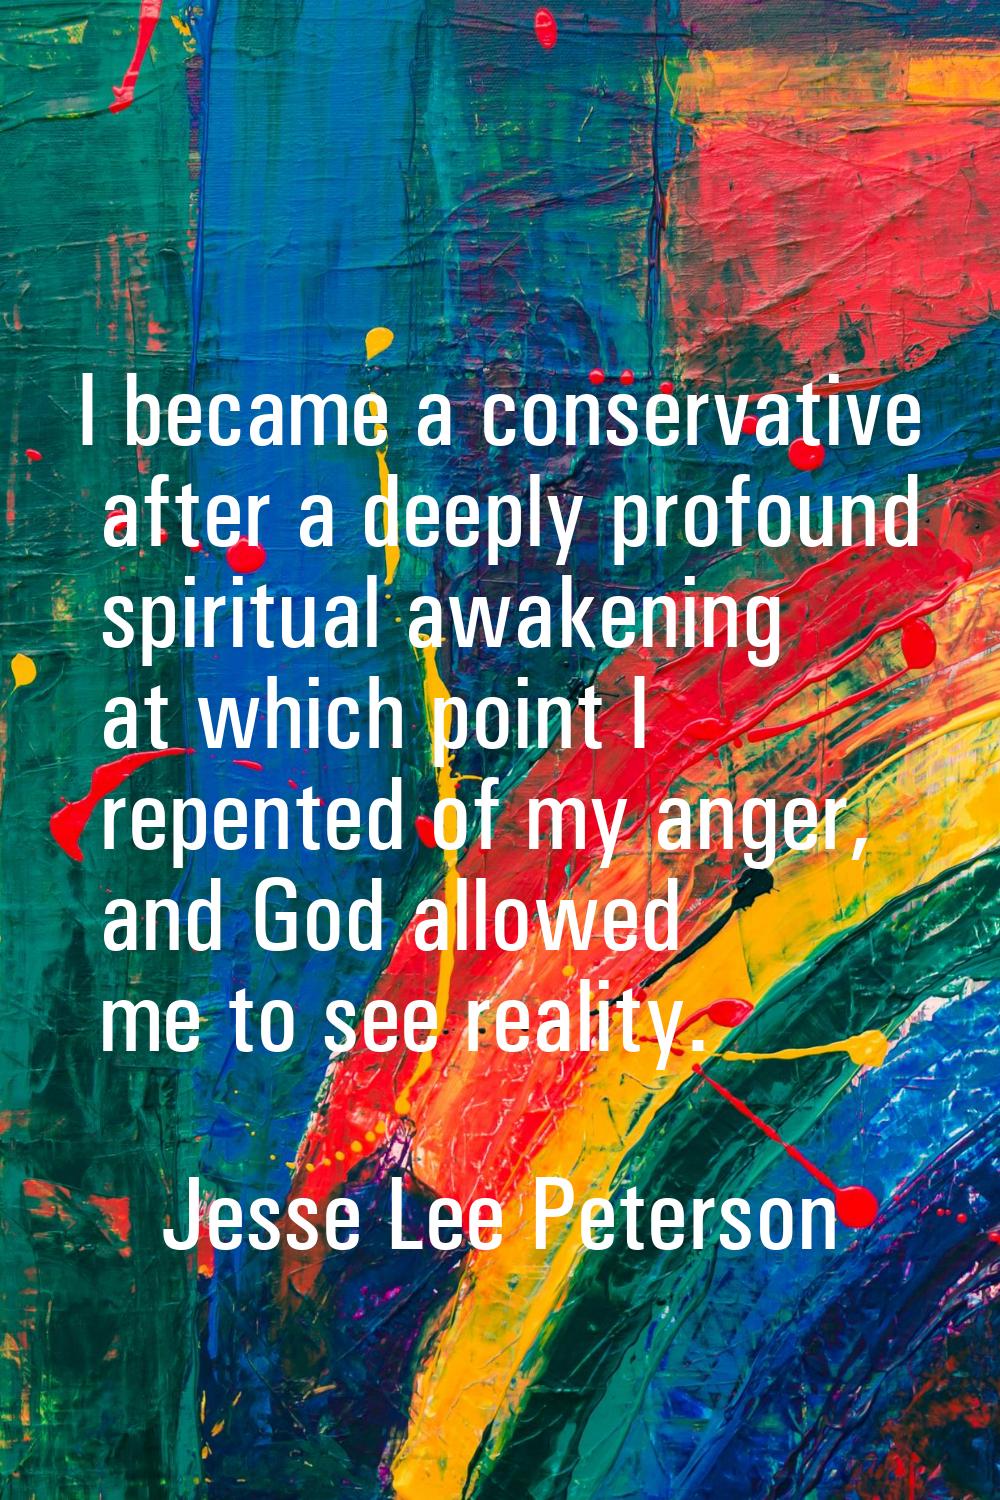 I became a conservative after a deeply profound spiritual awakening at which point I repented of my